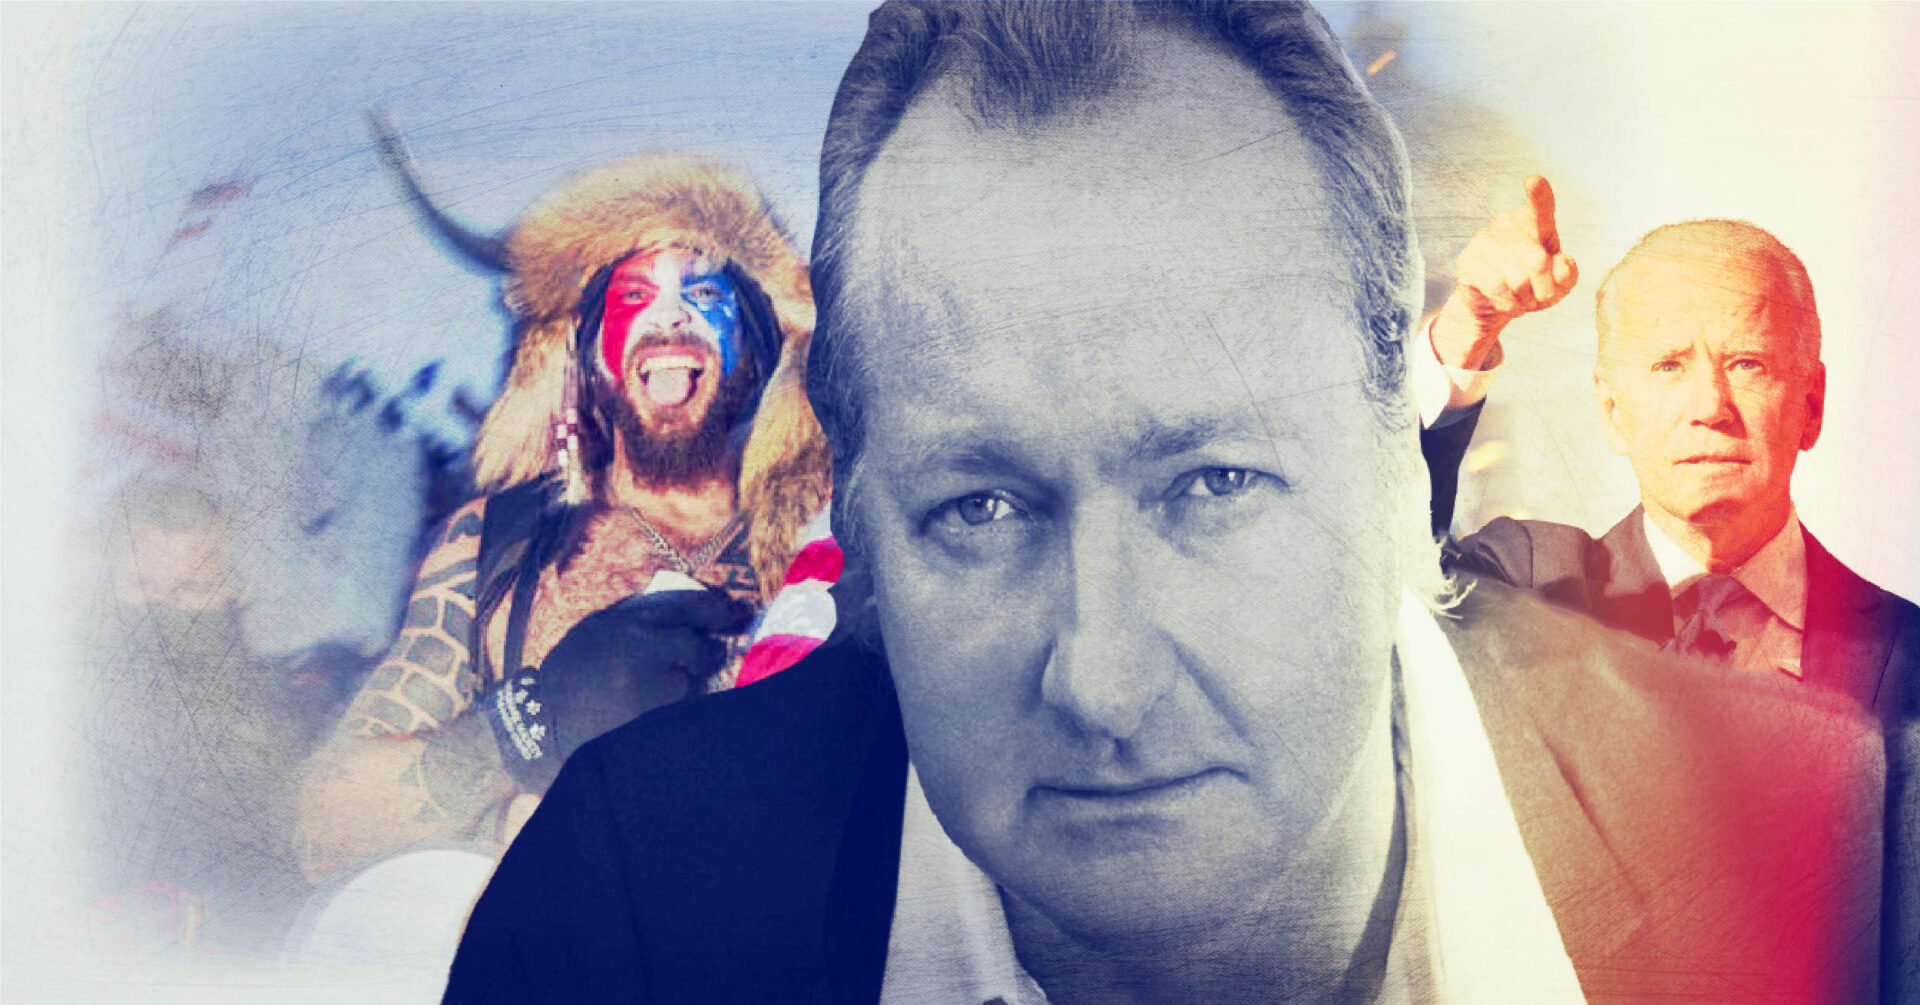 Actor Randy Quaid draws the line, declares WAR on liberals, “you’re my enemy, the enemy of America”…